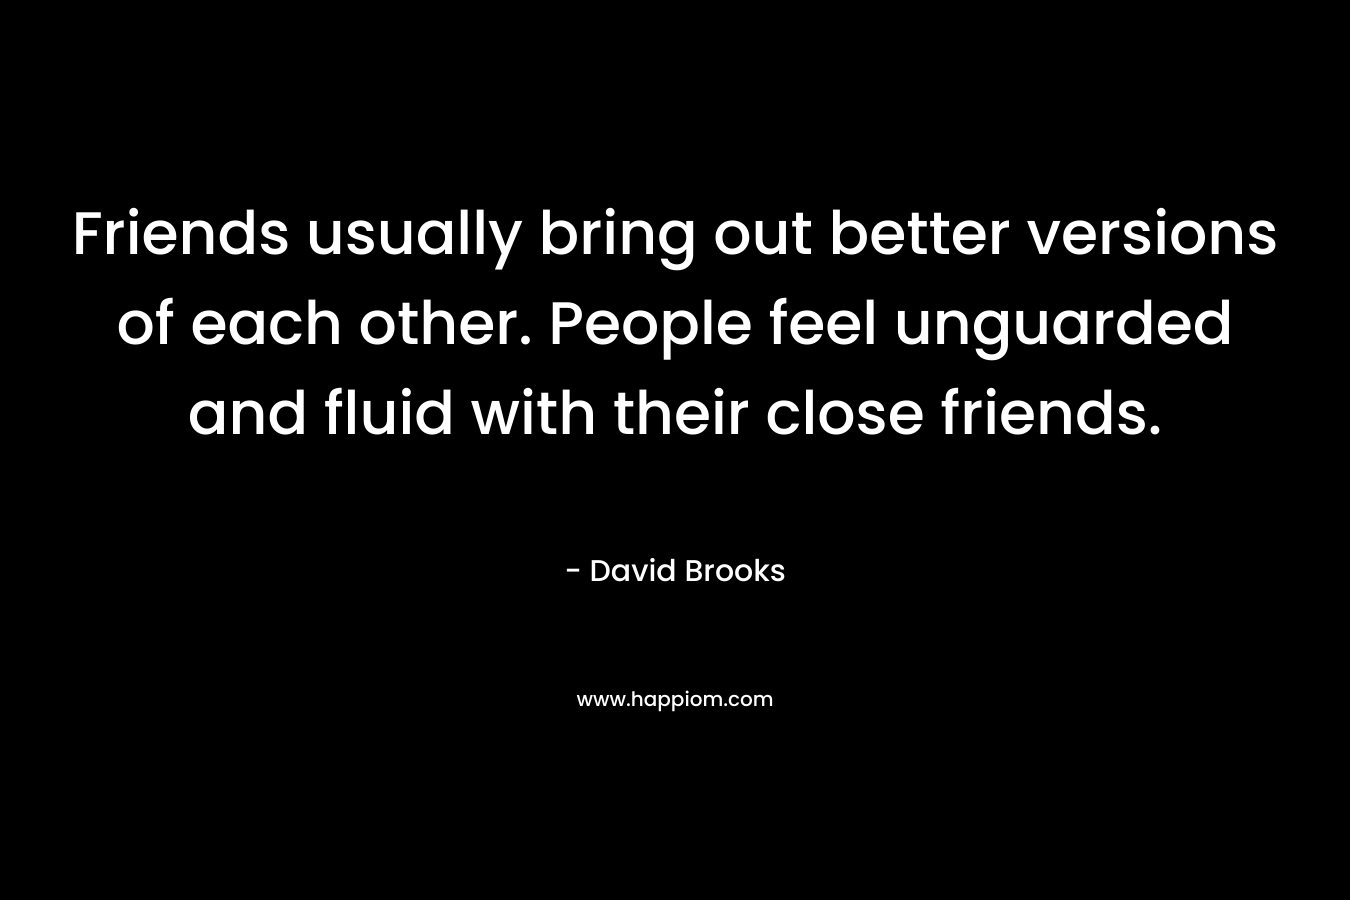 Friends usually bring out better versions of each other. People feel unguarded and fluid with their close friends.